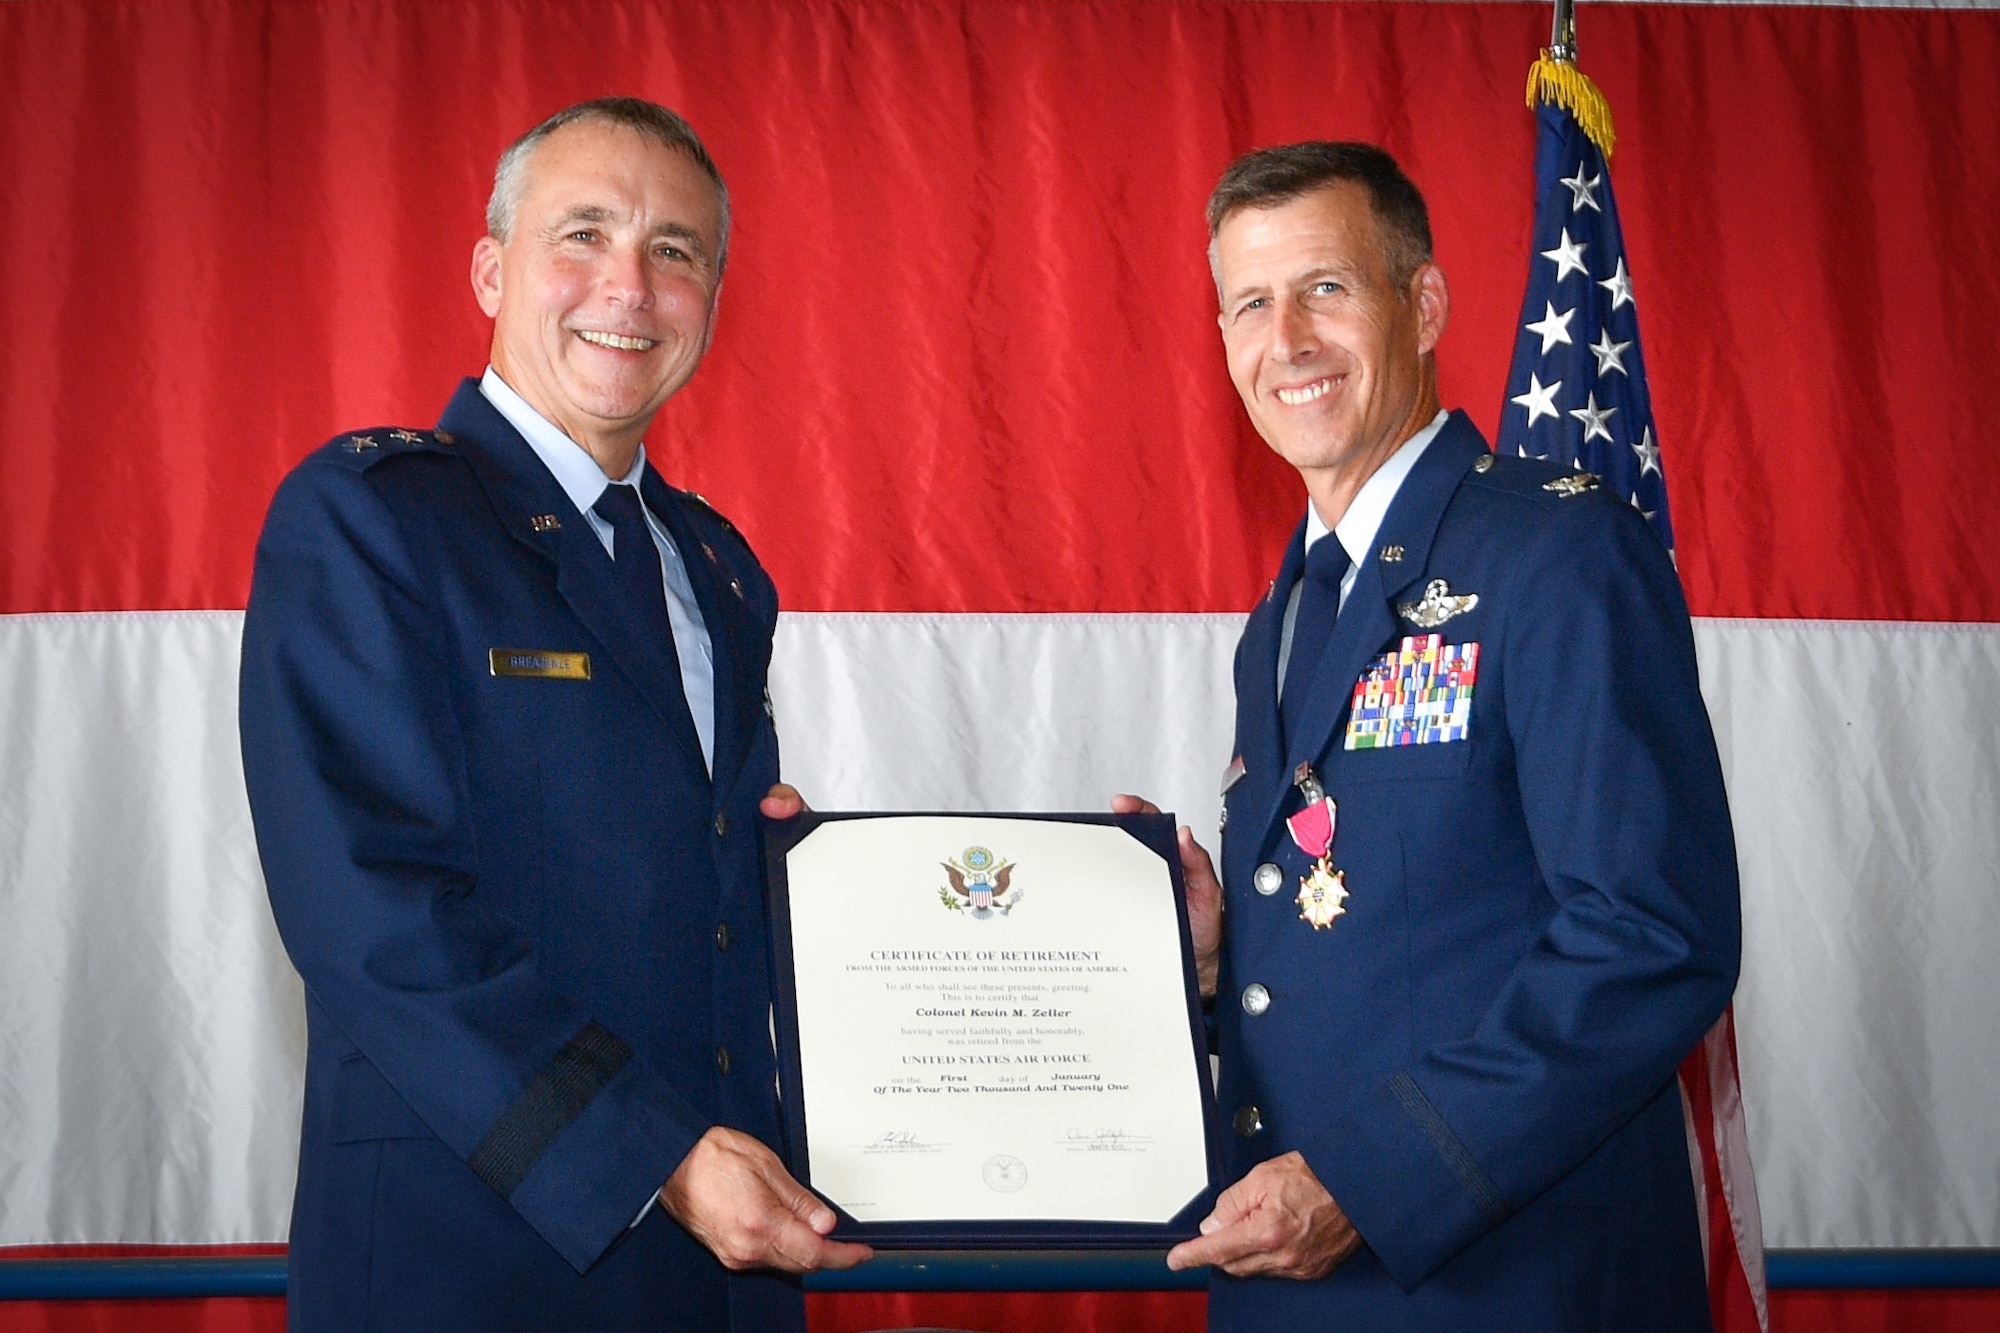 (left) Maj. Gen. John Breazeale, Mobilization Assistant to the Commander, HQ Air Combat Command, Joint Base Langley-Eustis, Va., retires former 301st Fighter Wing Director of Staff Col. Kevin "Fuzzy" Zeller during a retirement ceremony at Naval Air Station Joint Reserve Base Fort Worth, Texas, Oct. 23, 2021. Zeller was a command pilot with more than 4,901 flying hours including 345 combat hours [and 3,058 flying hours in the F-16 Fighting Falcon] in his more than 30 years of service. (U.S. Air Force photo by Jeremy Roman)